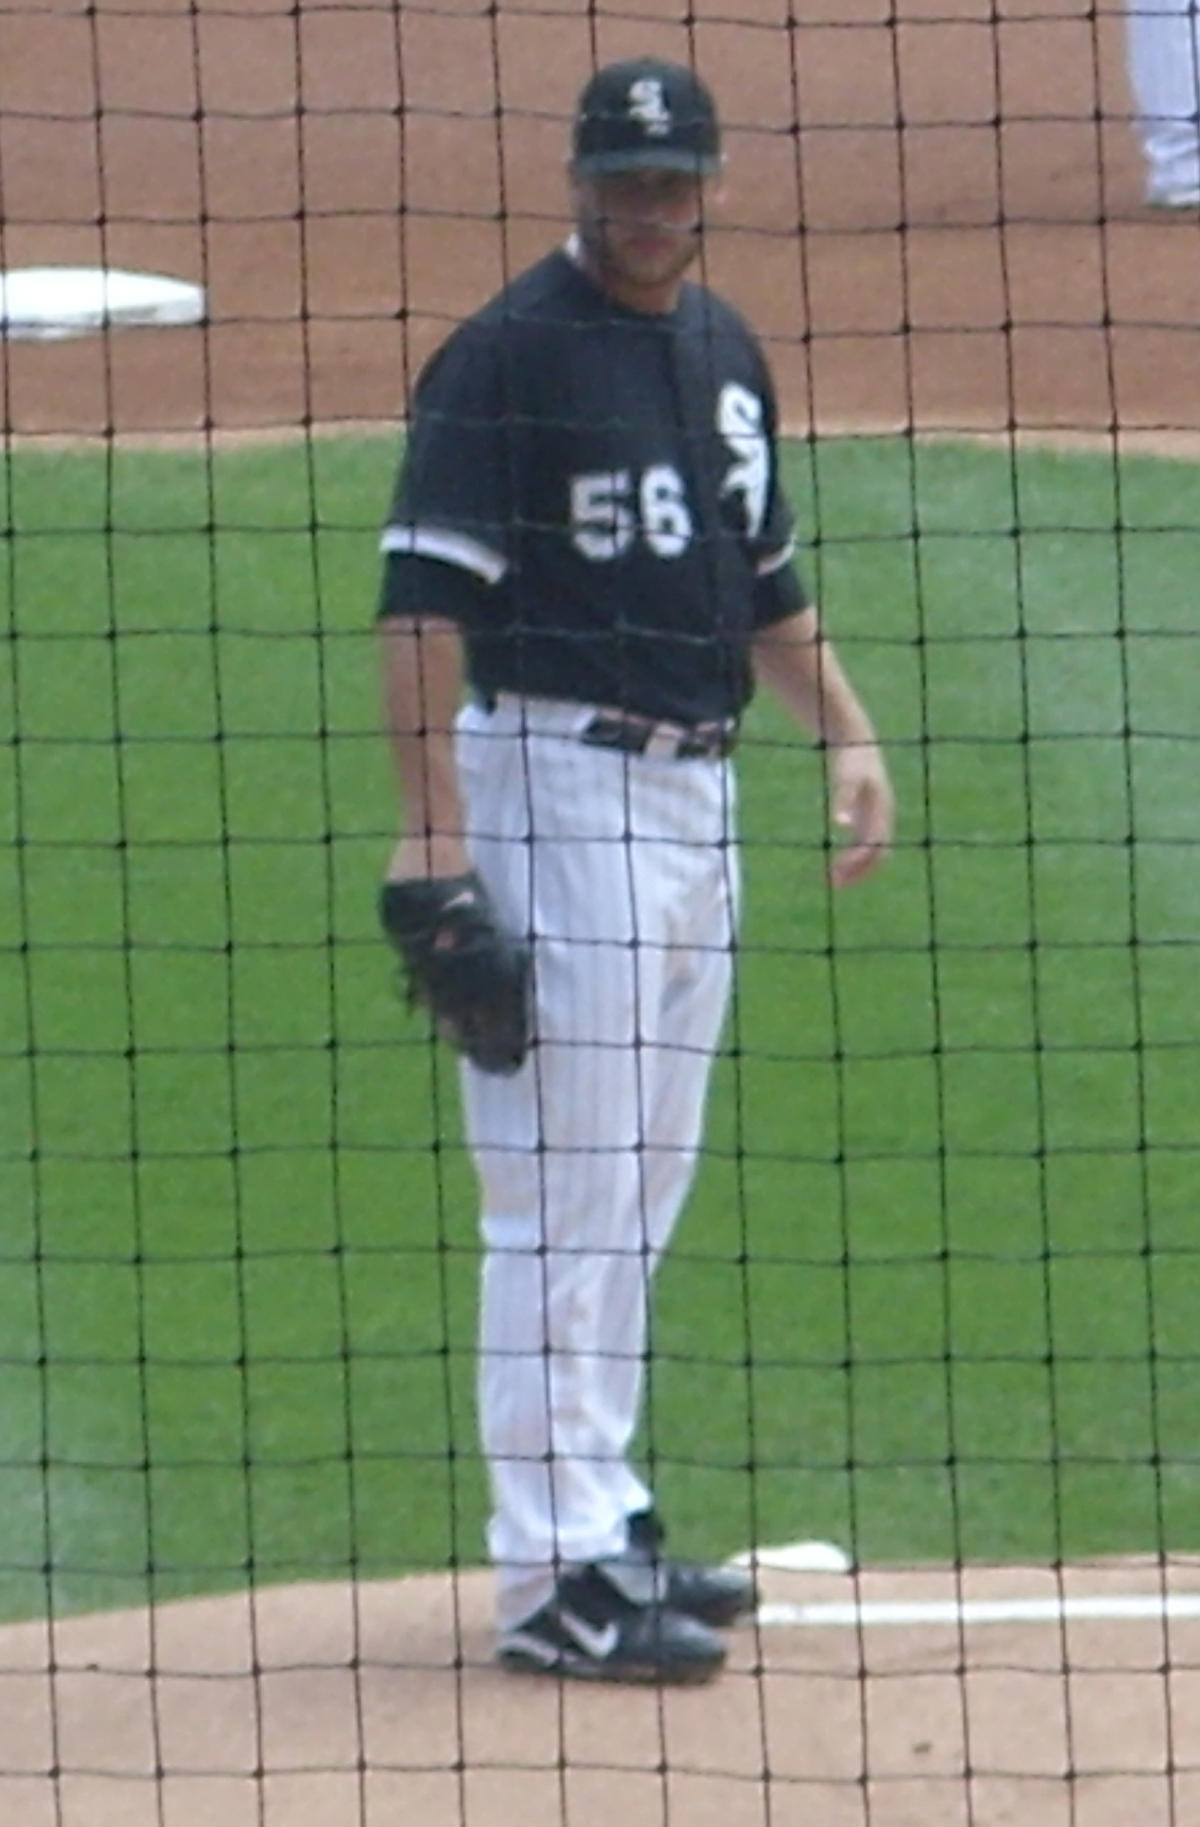 a baseball player standing on the mound during a game